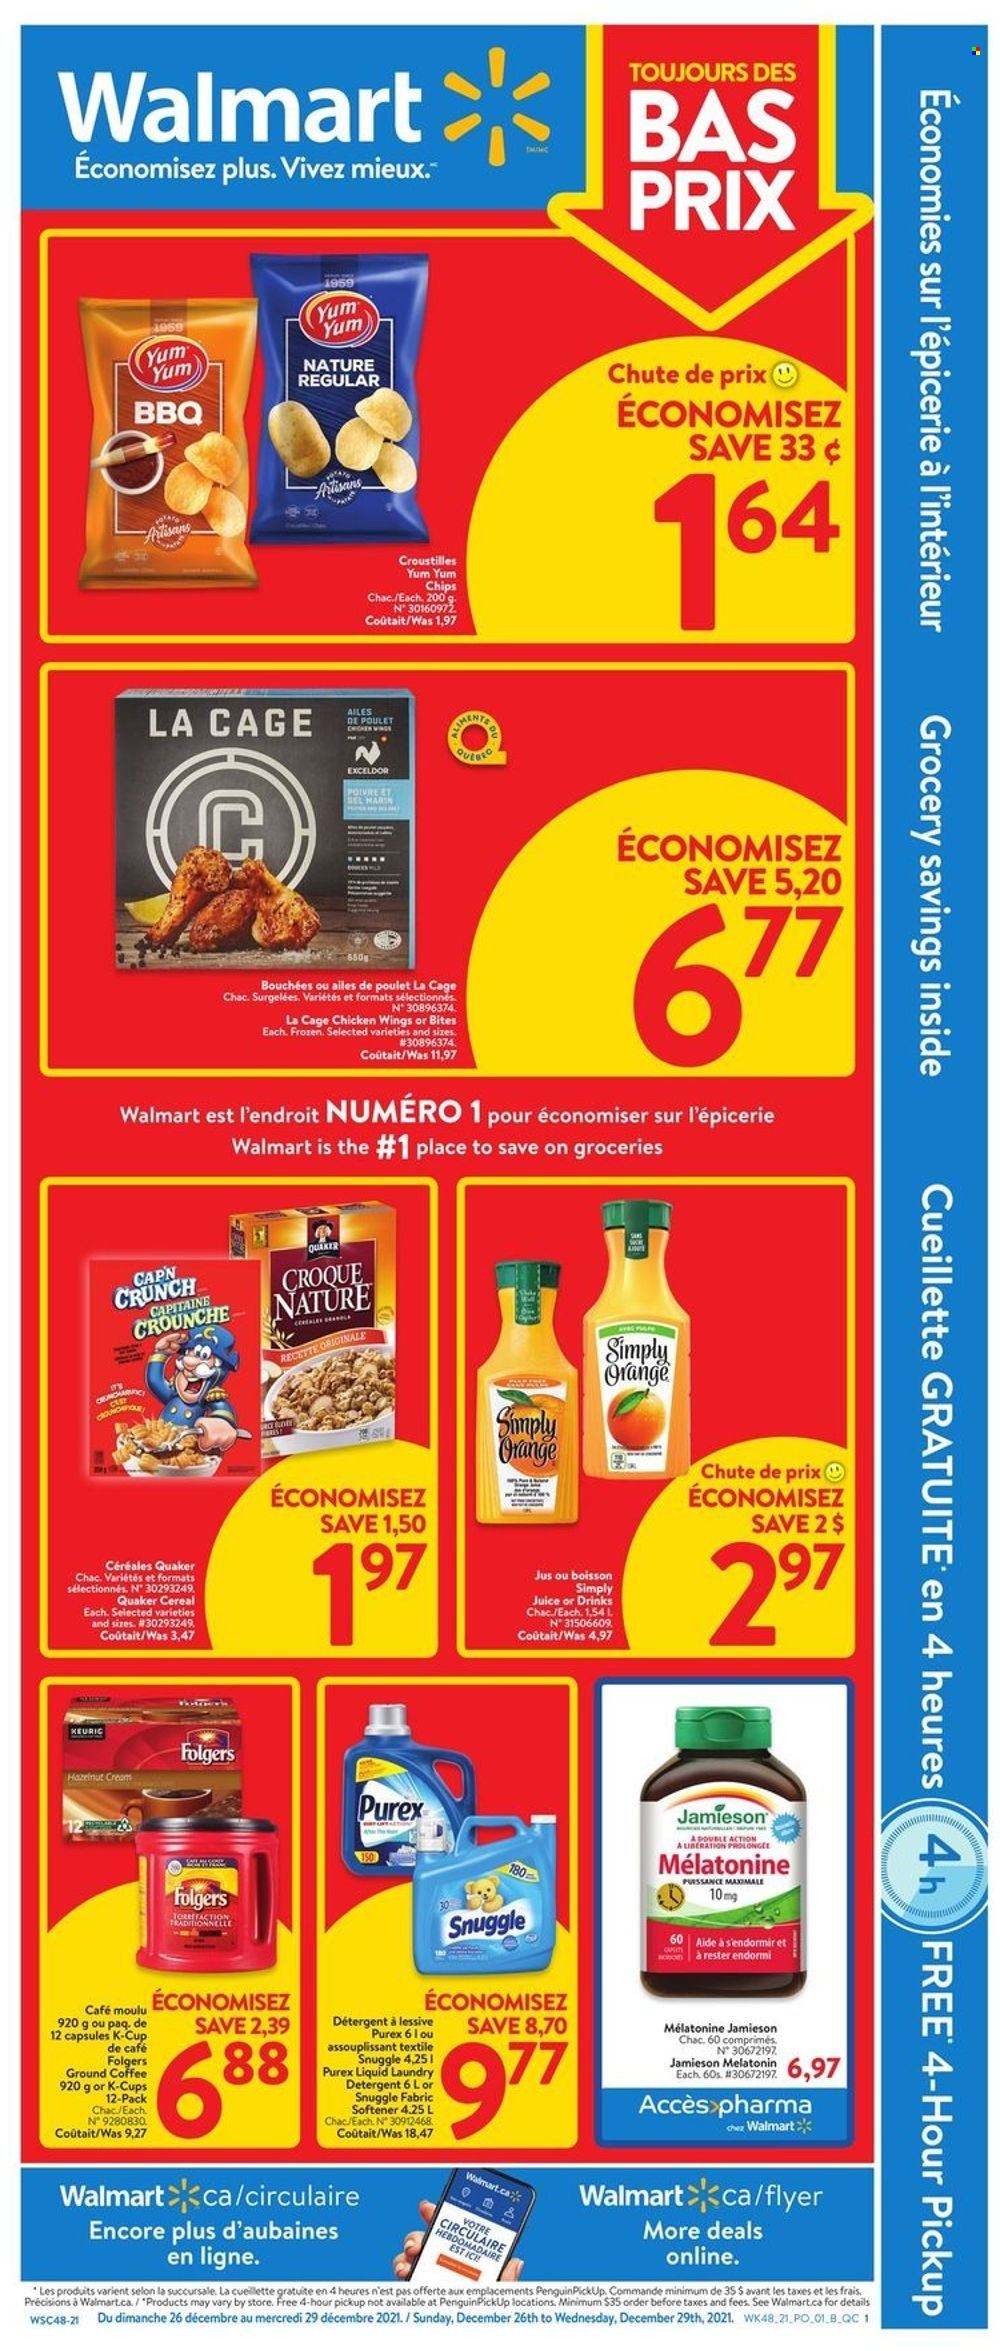 thumbnail - Walmart Flyer - December 26, 2021 - December 29, 2021 - Sales products - Quaker, chicken wings, cereals, juice, coffee, Folgers, ground coffee, coffee capsules, L'Or, K-Cups, Snuggle, fabric softener, laundry detergent, Purex, cage, Melatonin, detergent, oranges. Page 1.